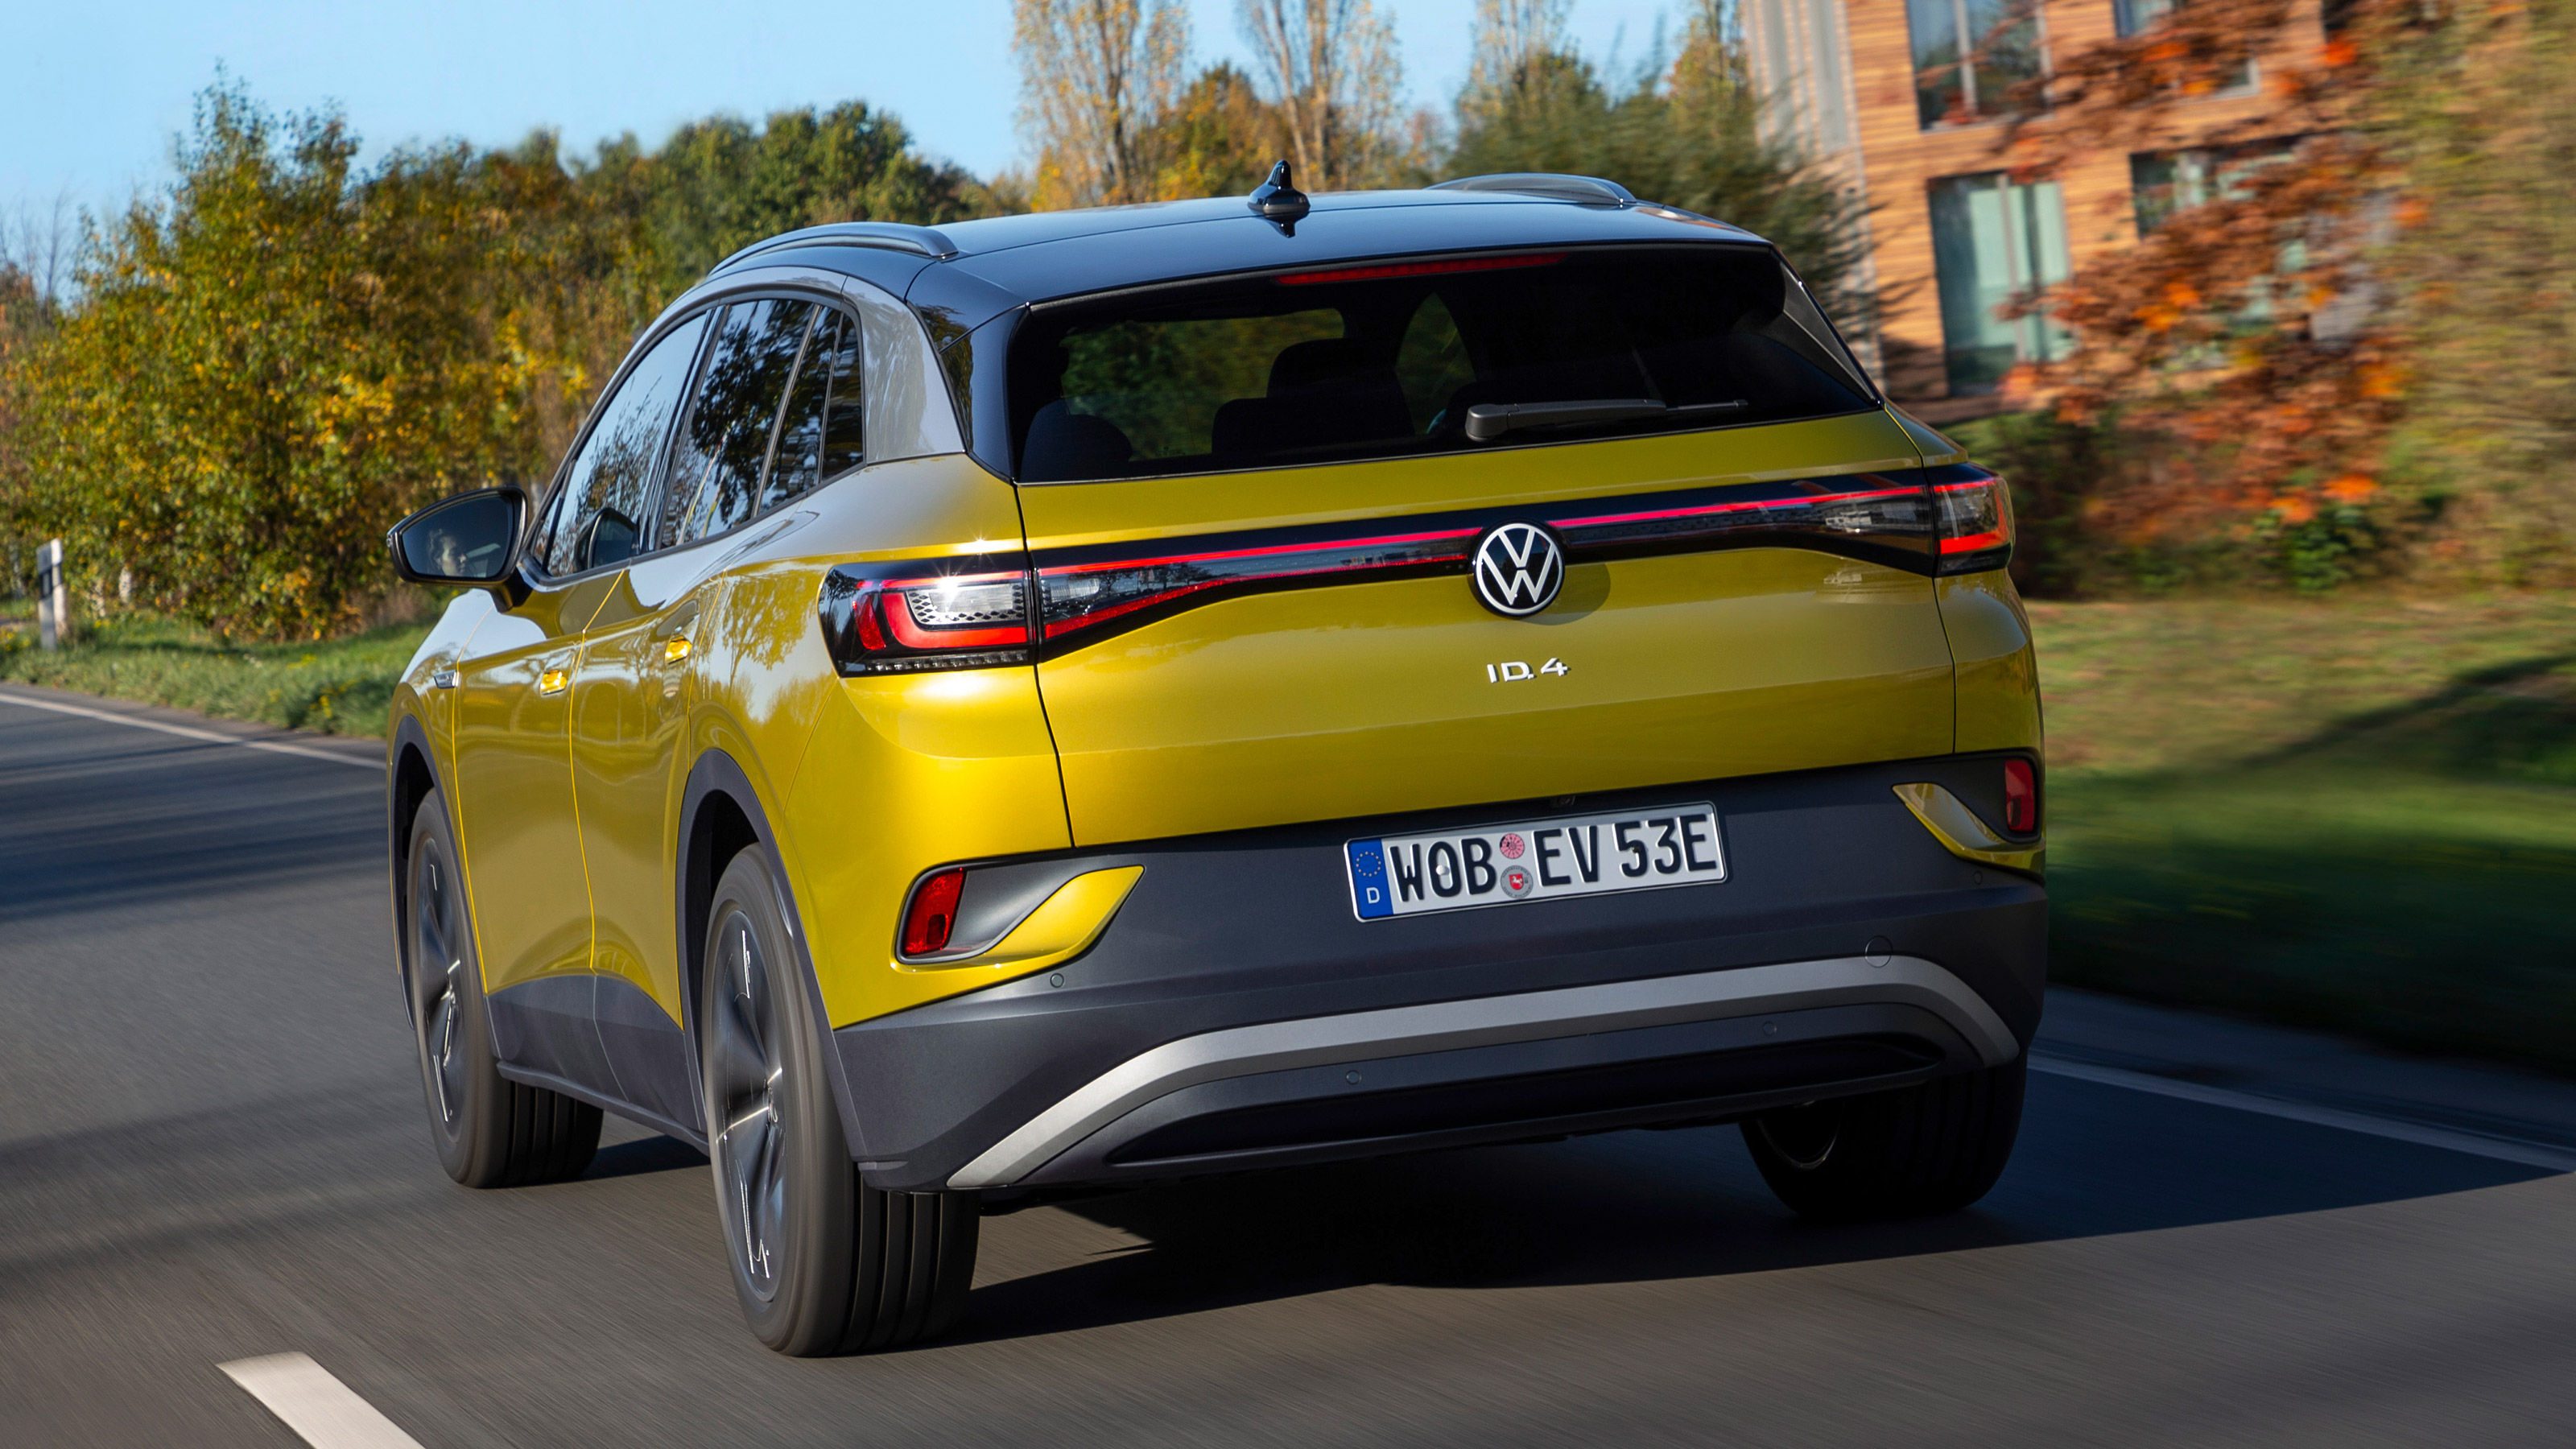 Volkswagen Id 4 Electric Suv 2021 Specs Pictures And On Sale Date Drivingelectric